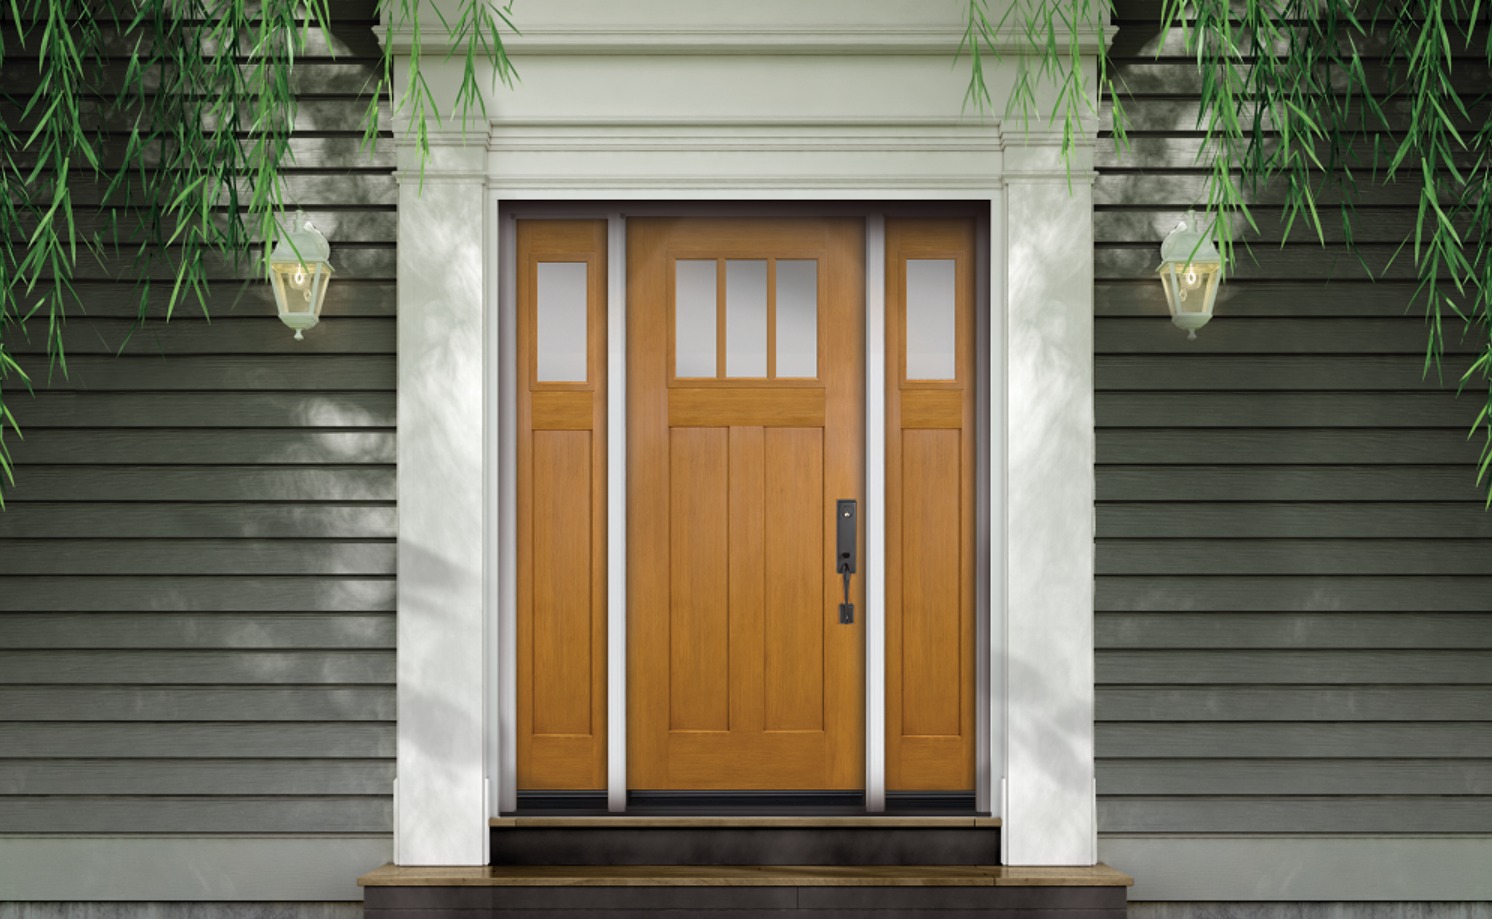 Exterior Fiberglass Doors: Everything You Need to Know - This Old